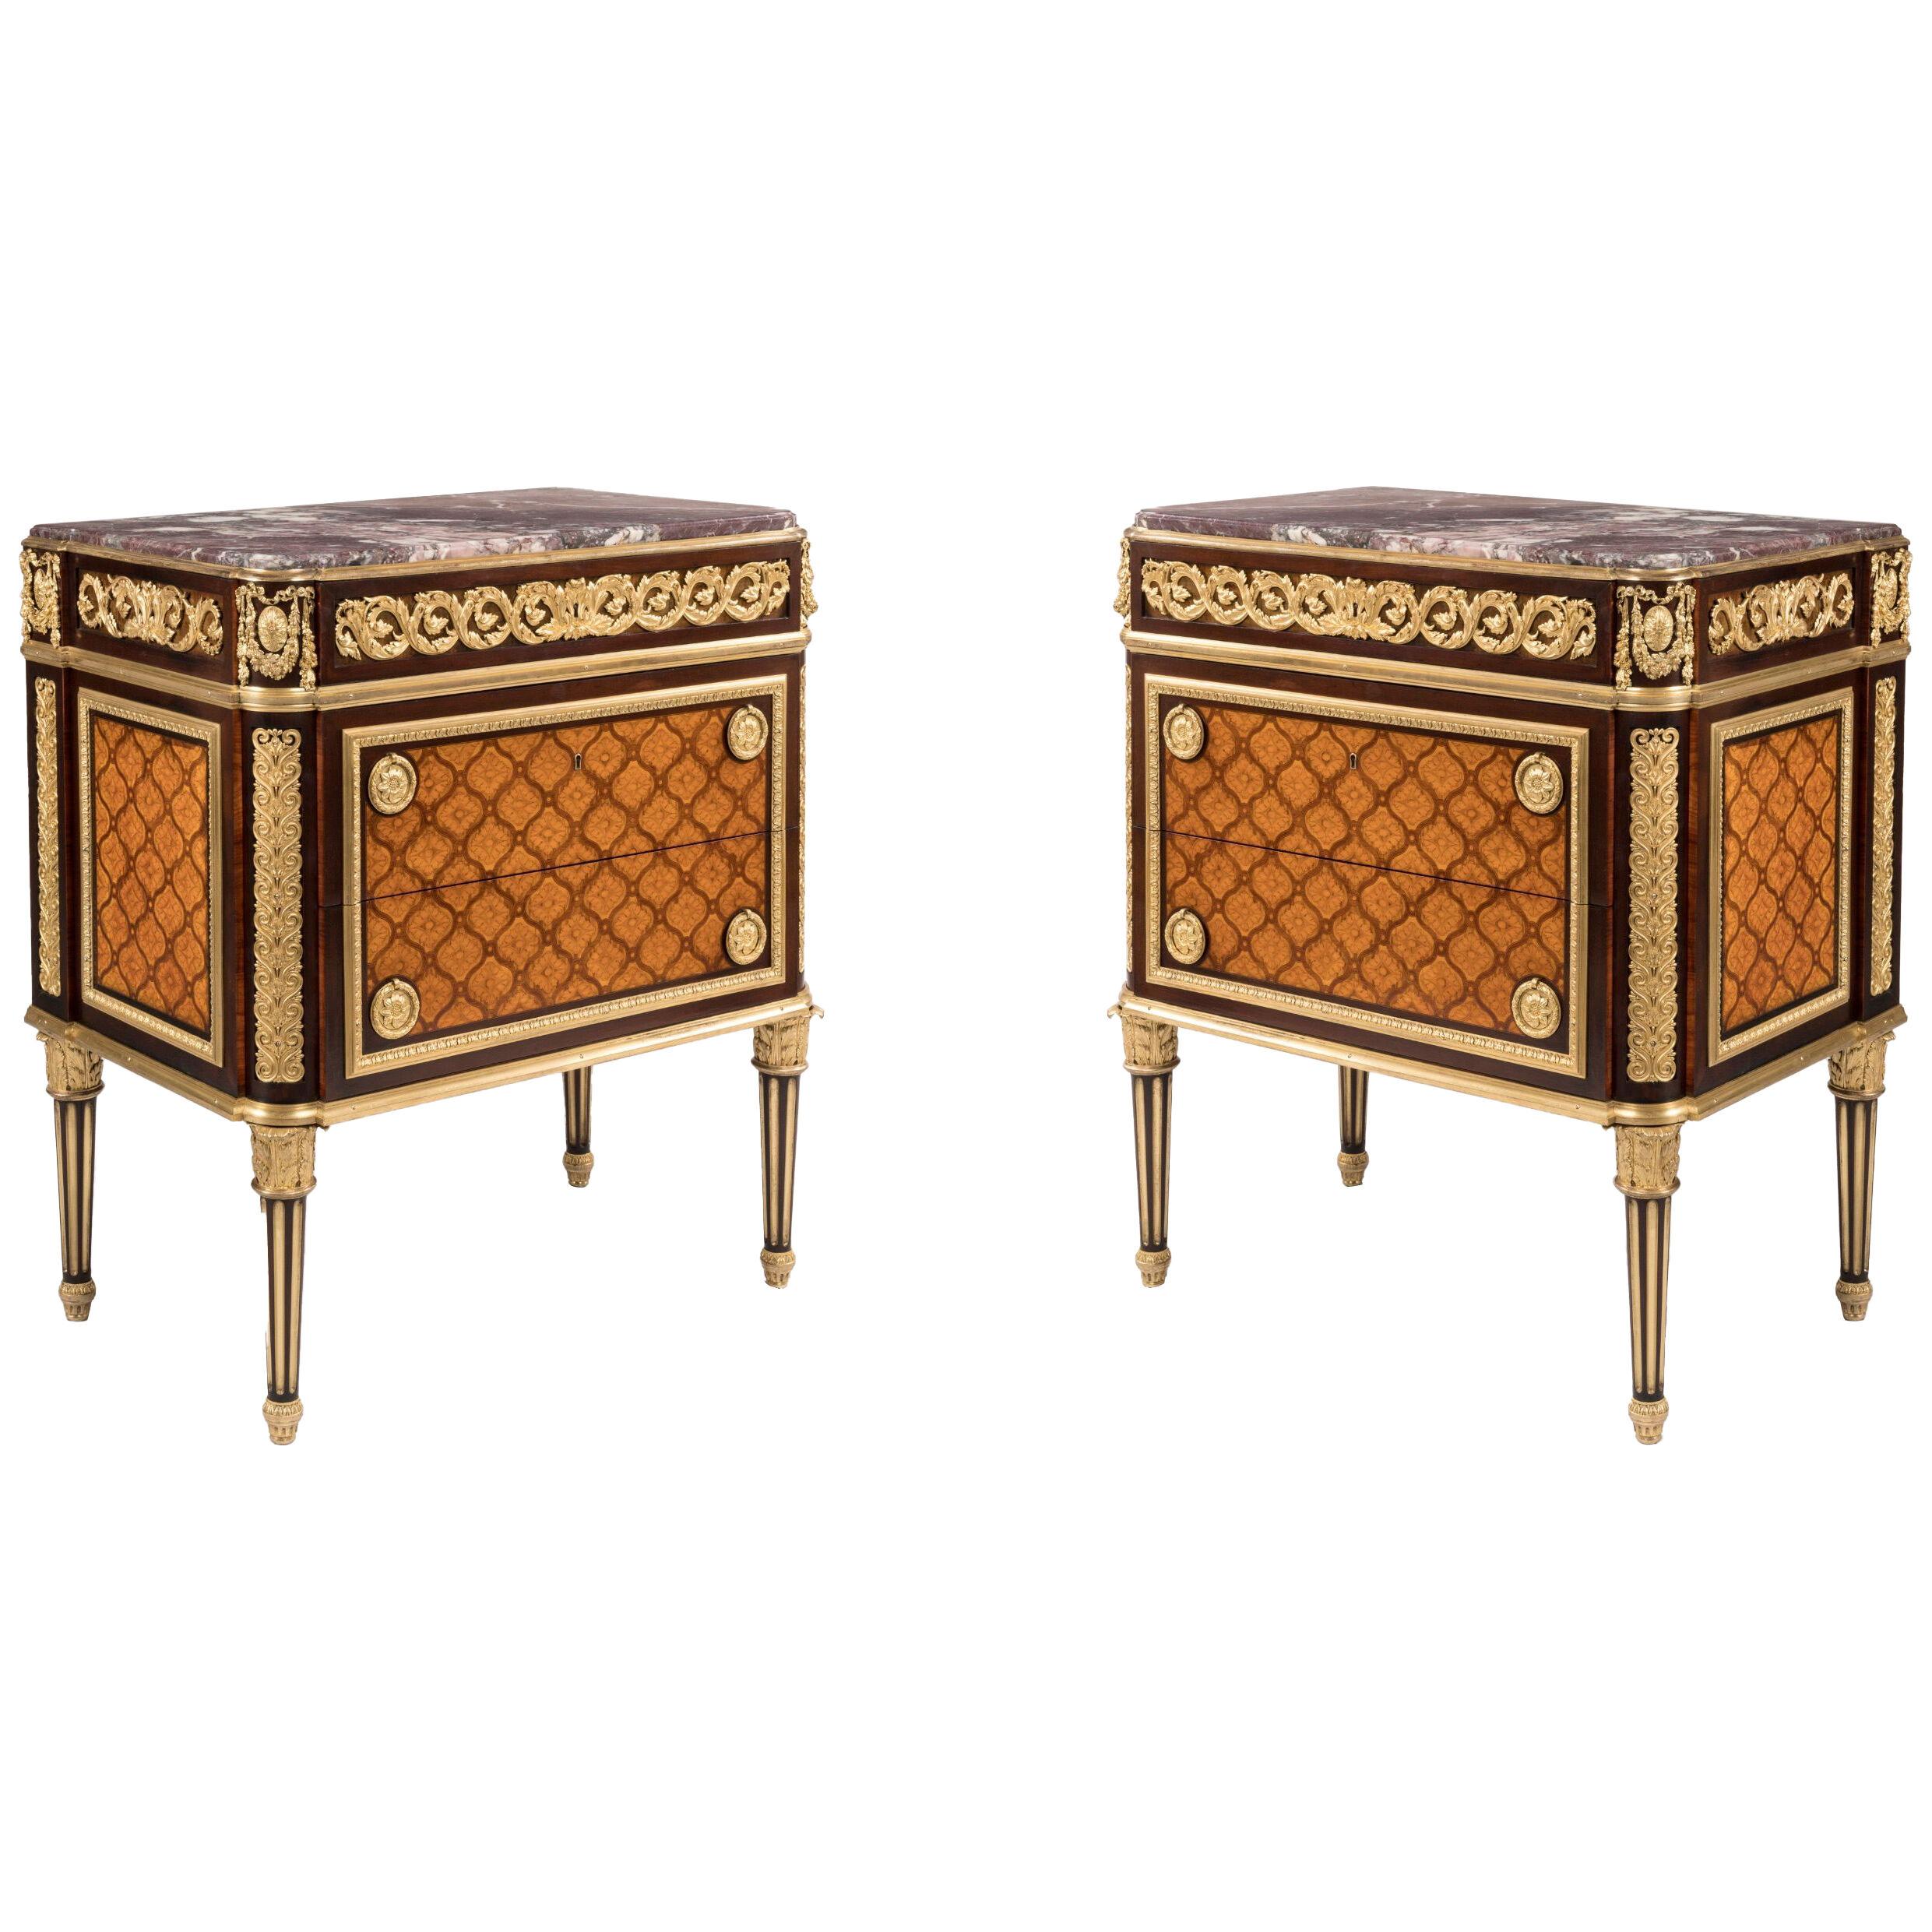 A Pair of 'Versailles' Commodes in the Louis XVI Manner